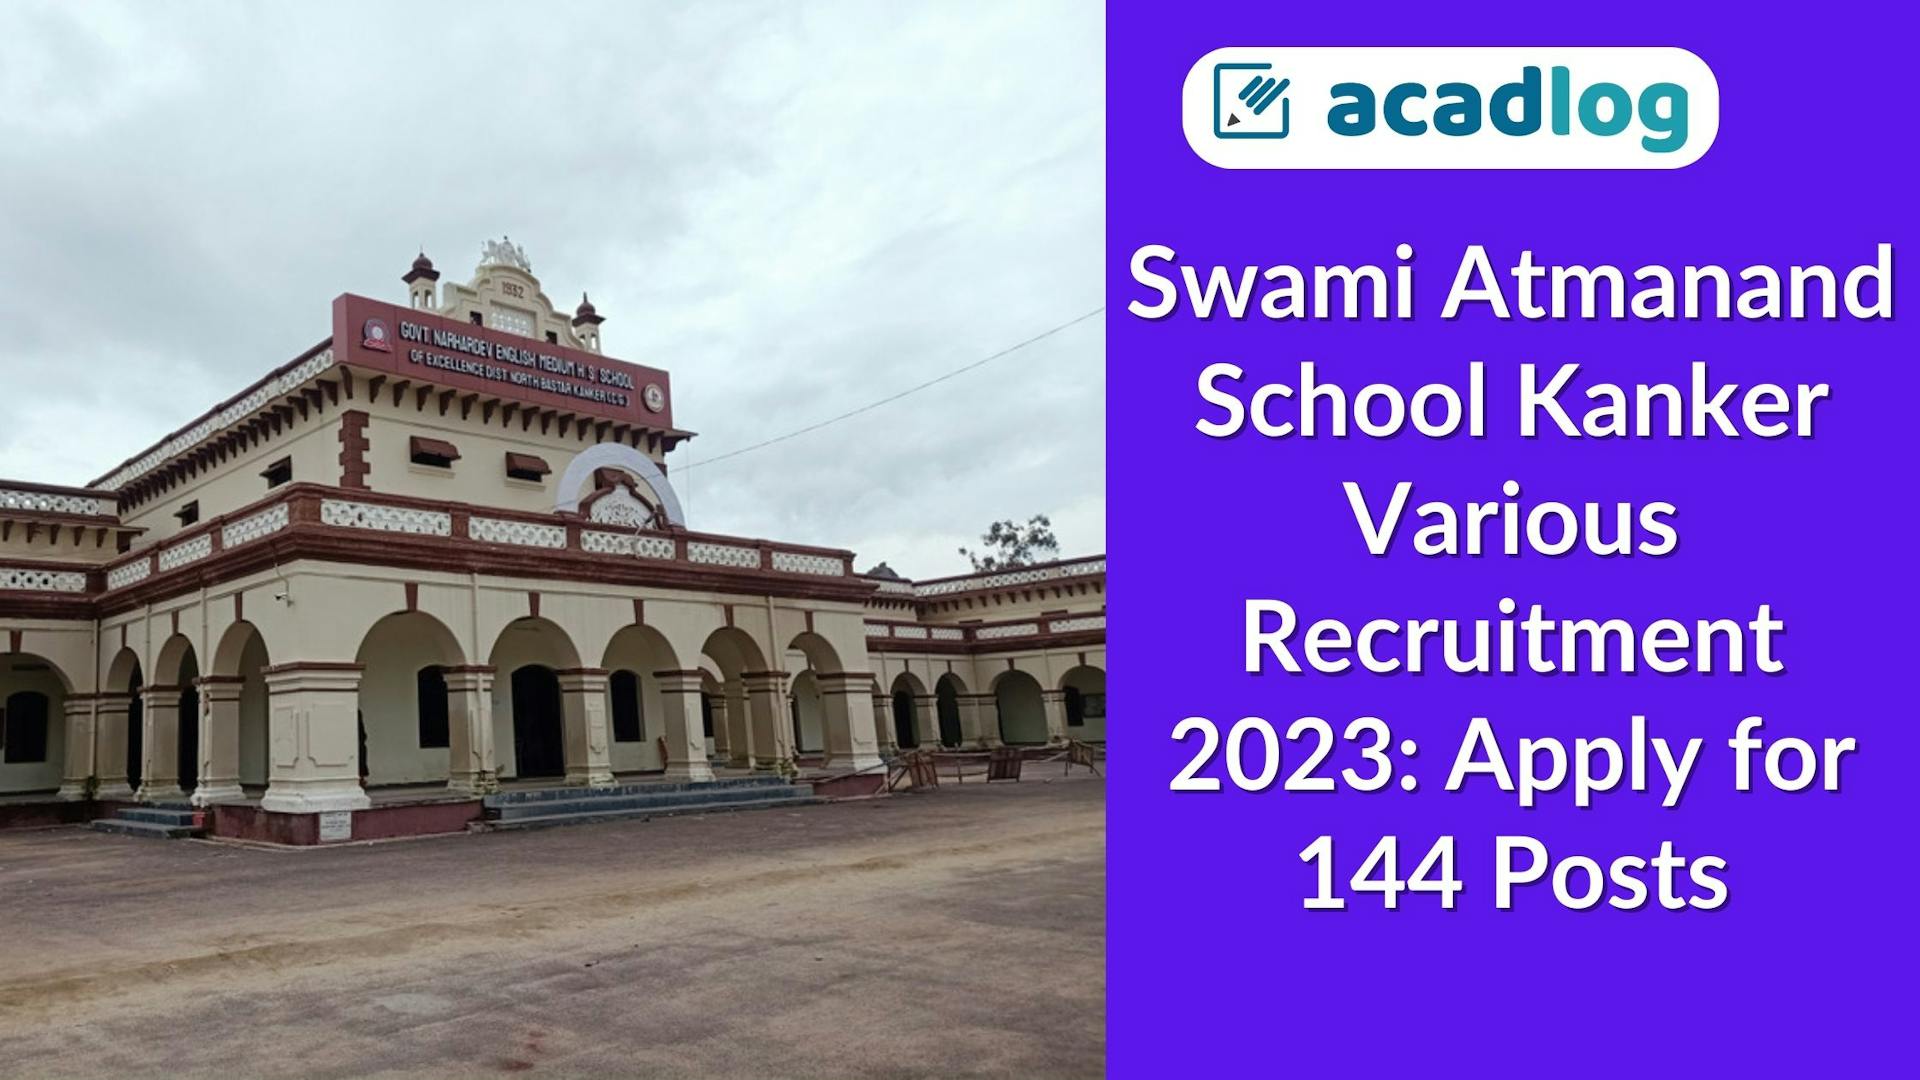 Swami Atmanand School Kanker Various Recruitment 2023: Apply for 144 Posts